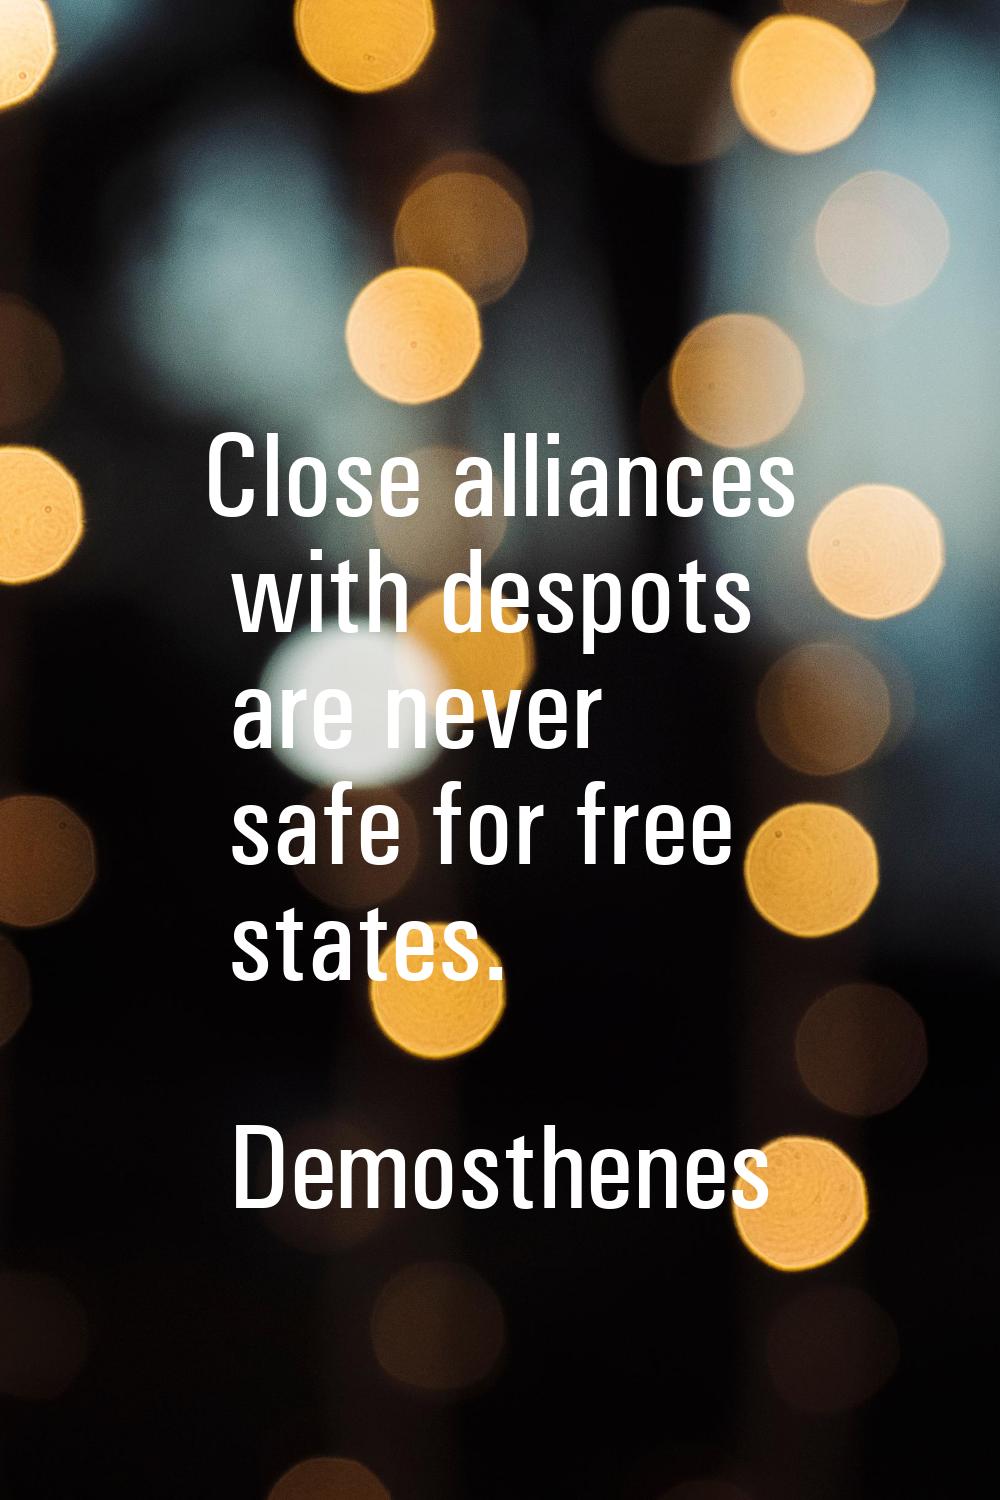 Close alliances with despots are never safe for free states.